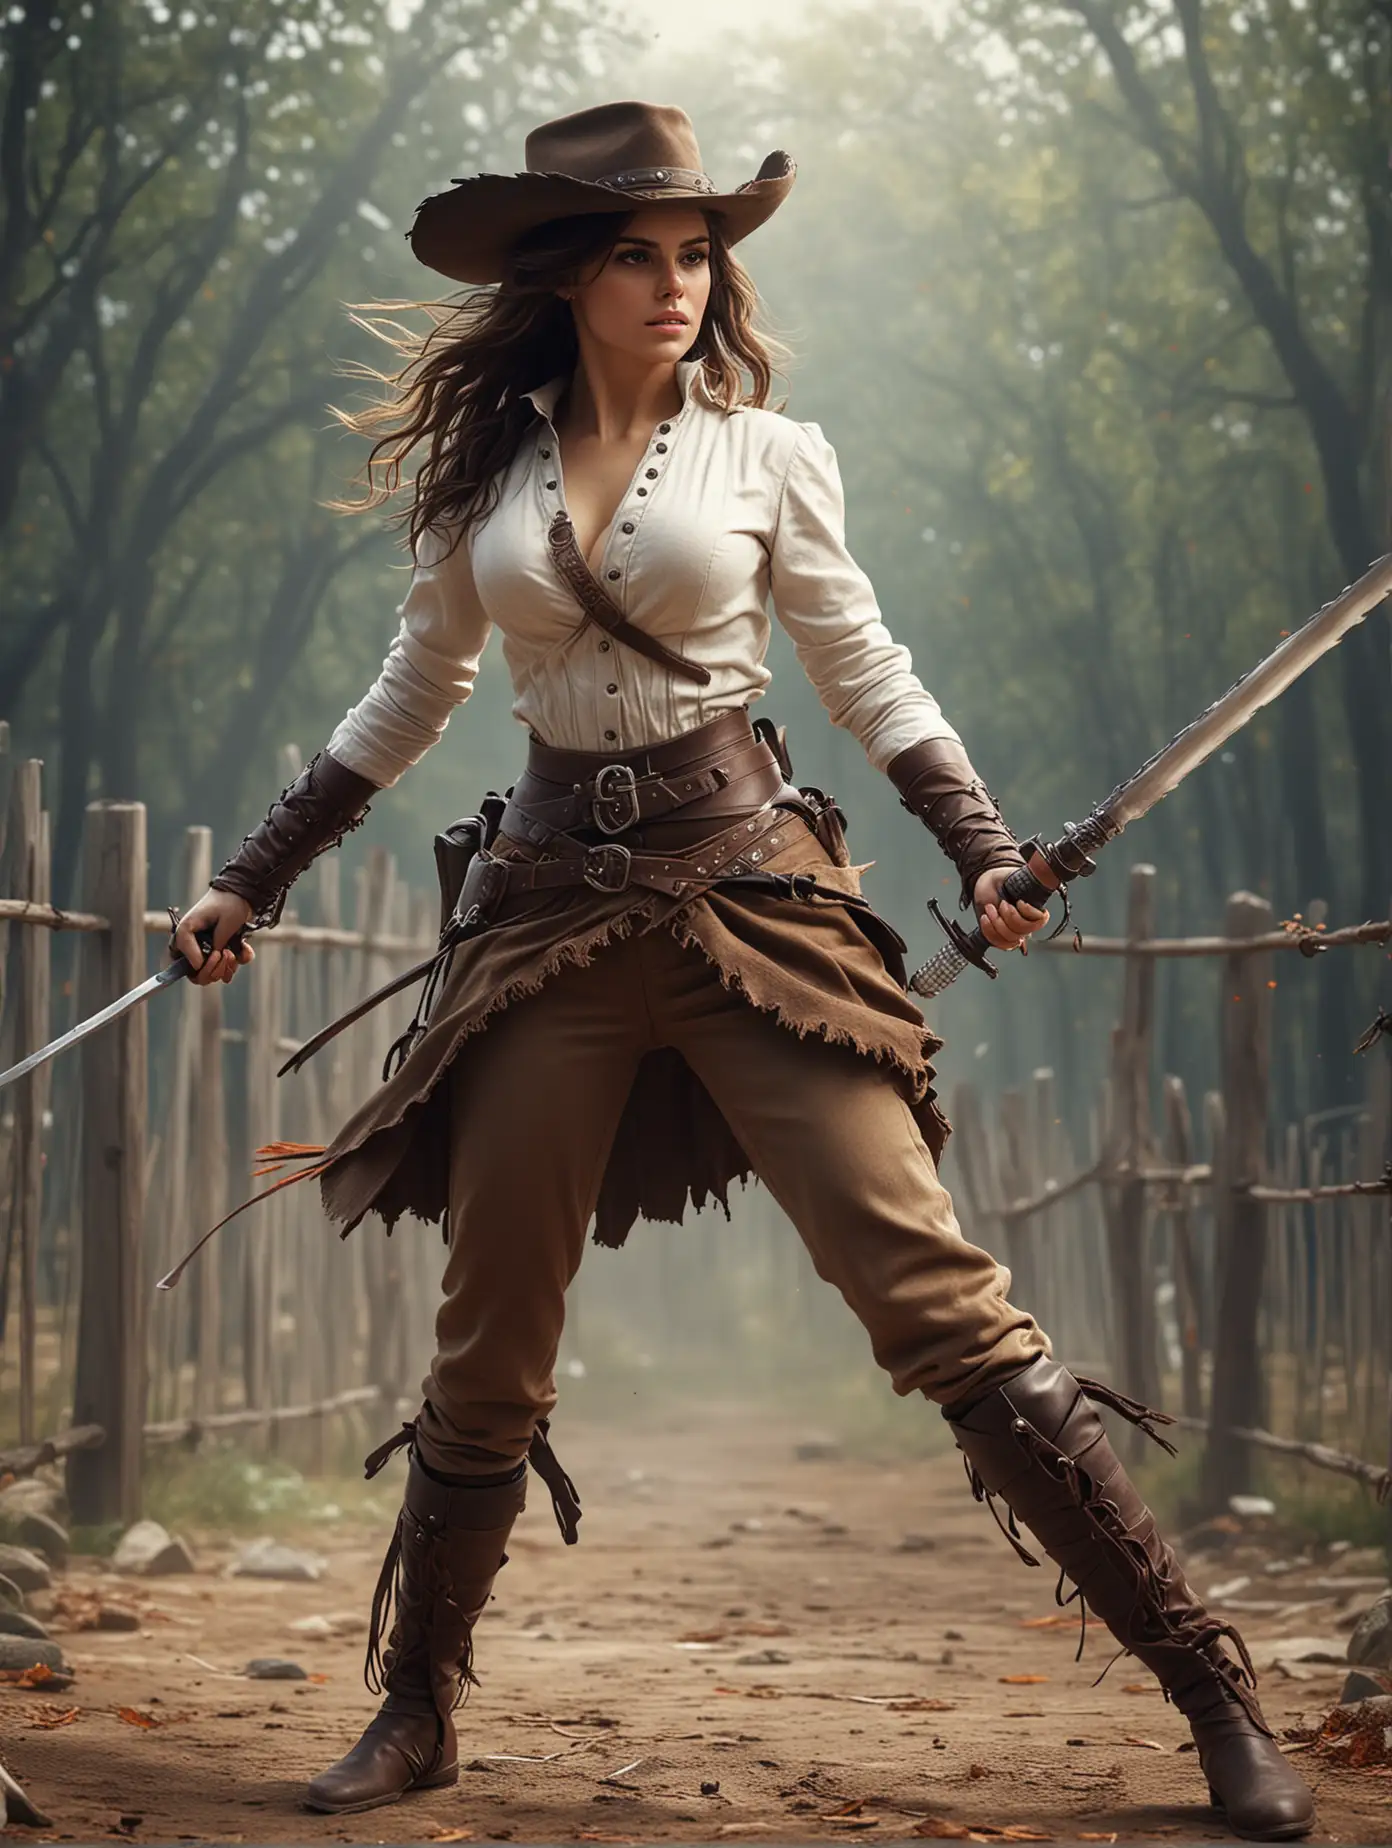 Fantasy-Cosplay-Brunette-Girl-in-Dynamic-Fencing-Pose-as-The-Lone-Ranger